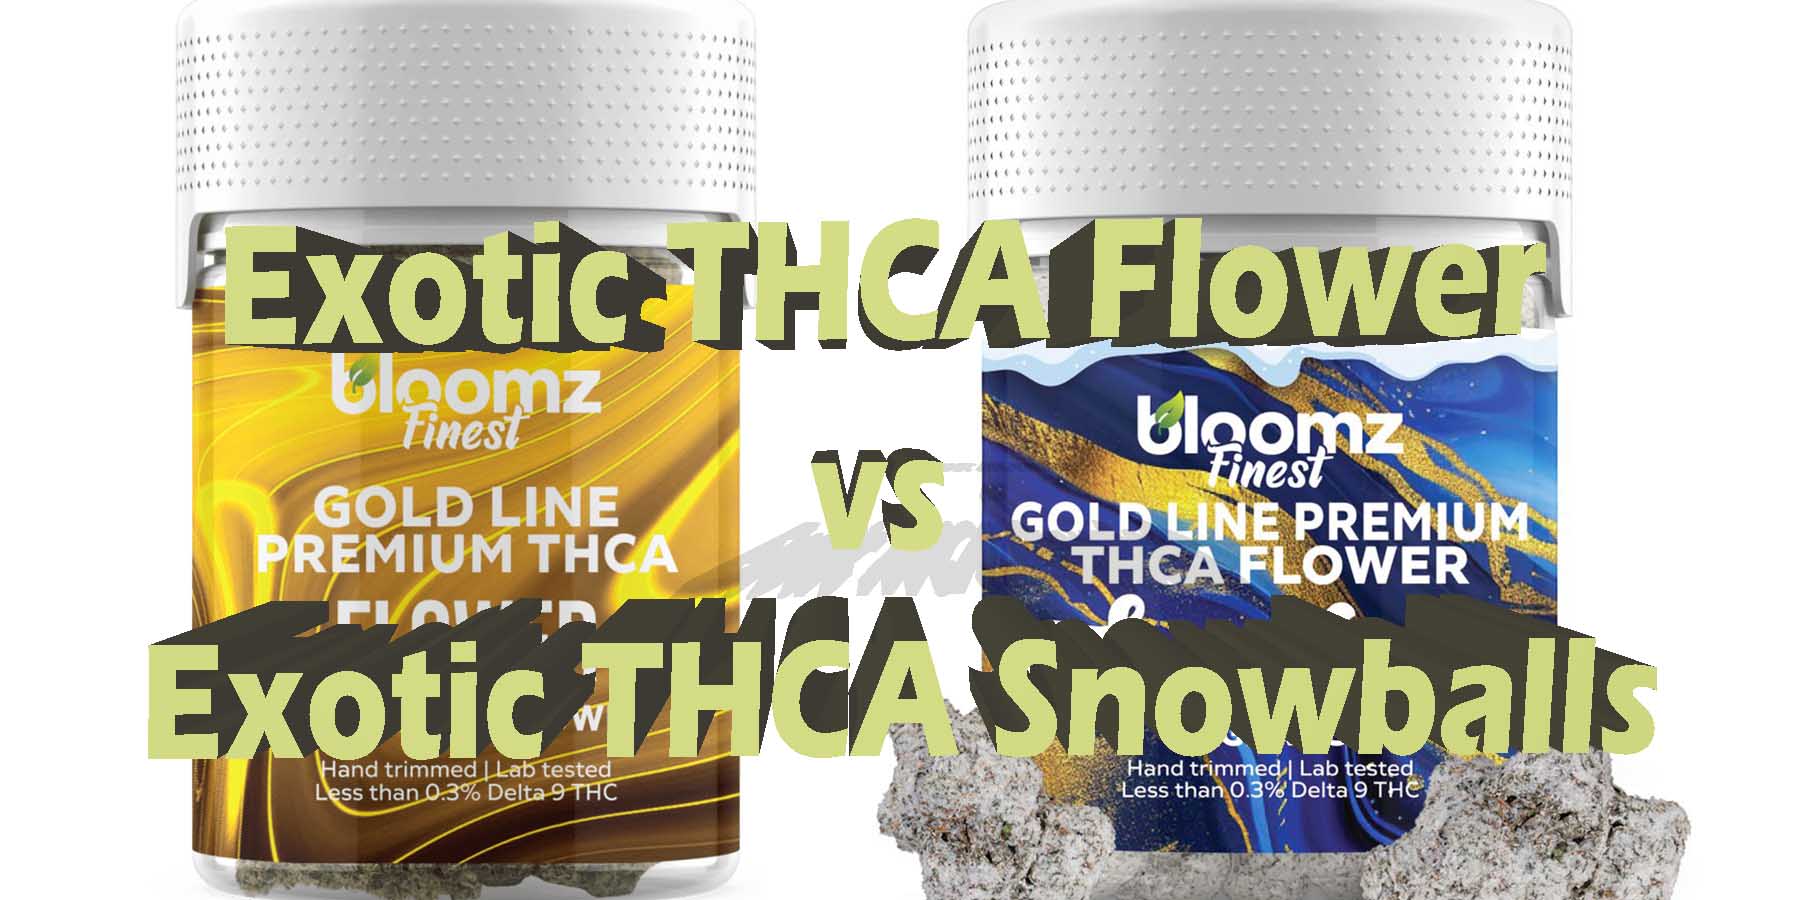 Exotic THCA Flower vs Exotic THCA Snowballs Which Is Better Whats The Difference HowToGetNearMe BestPlace LowestPrice Coupon Discount For Smoking Best Brand D9 D8 Binoid